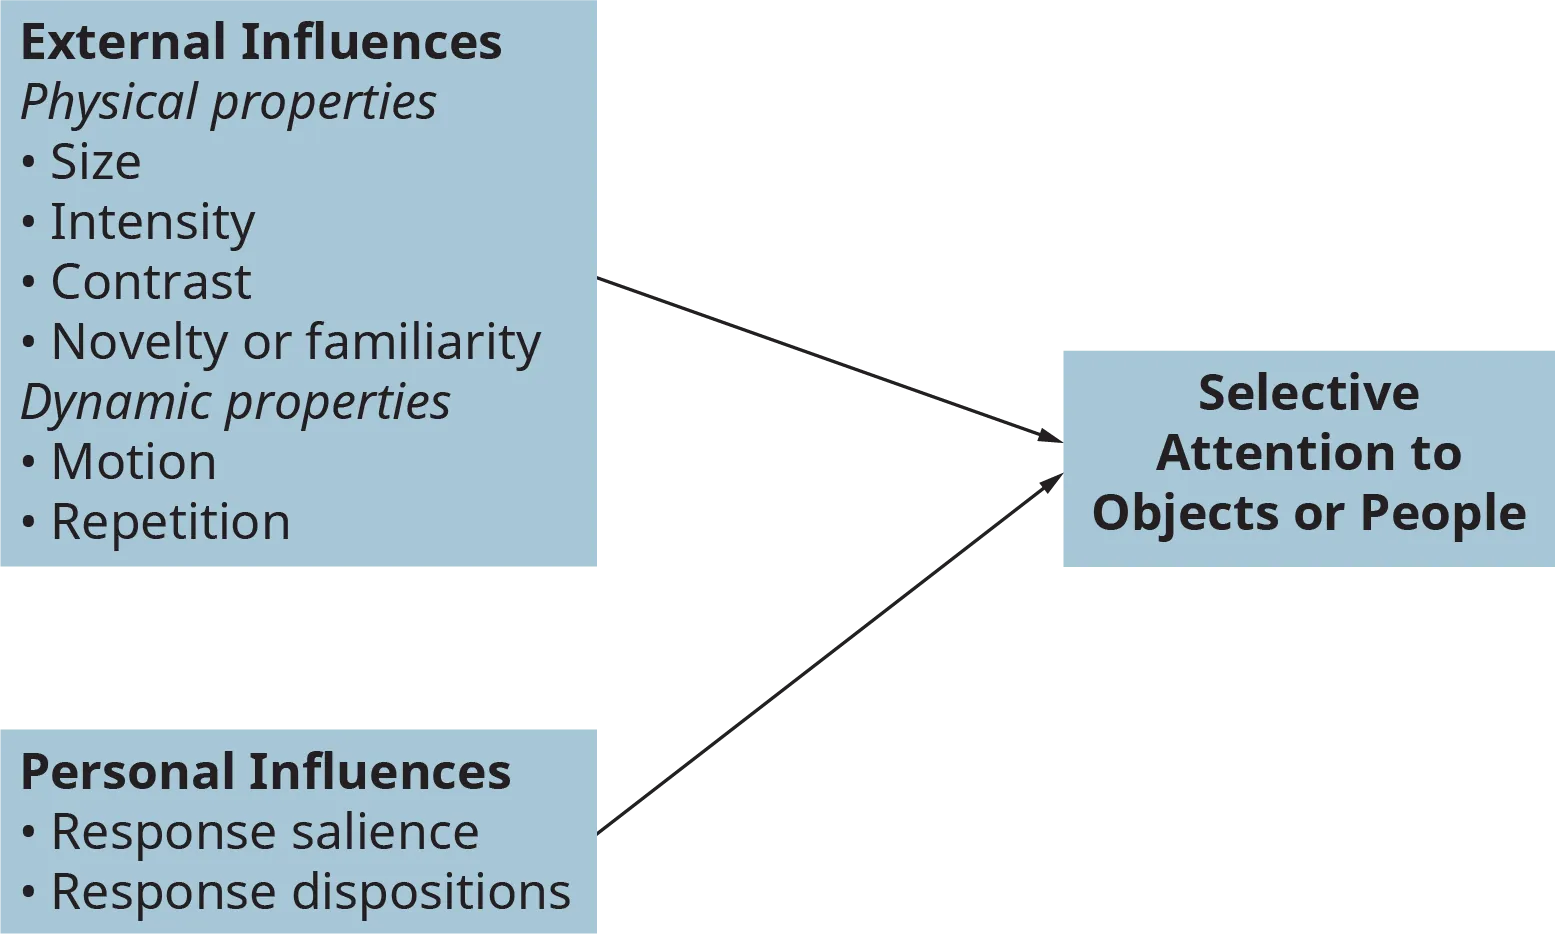 An illustration shows the major influences on selective attention.